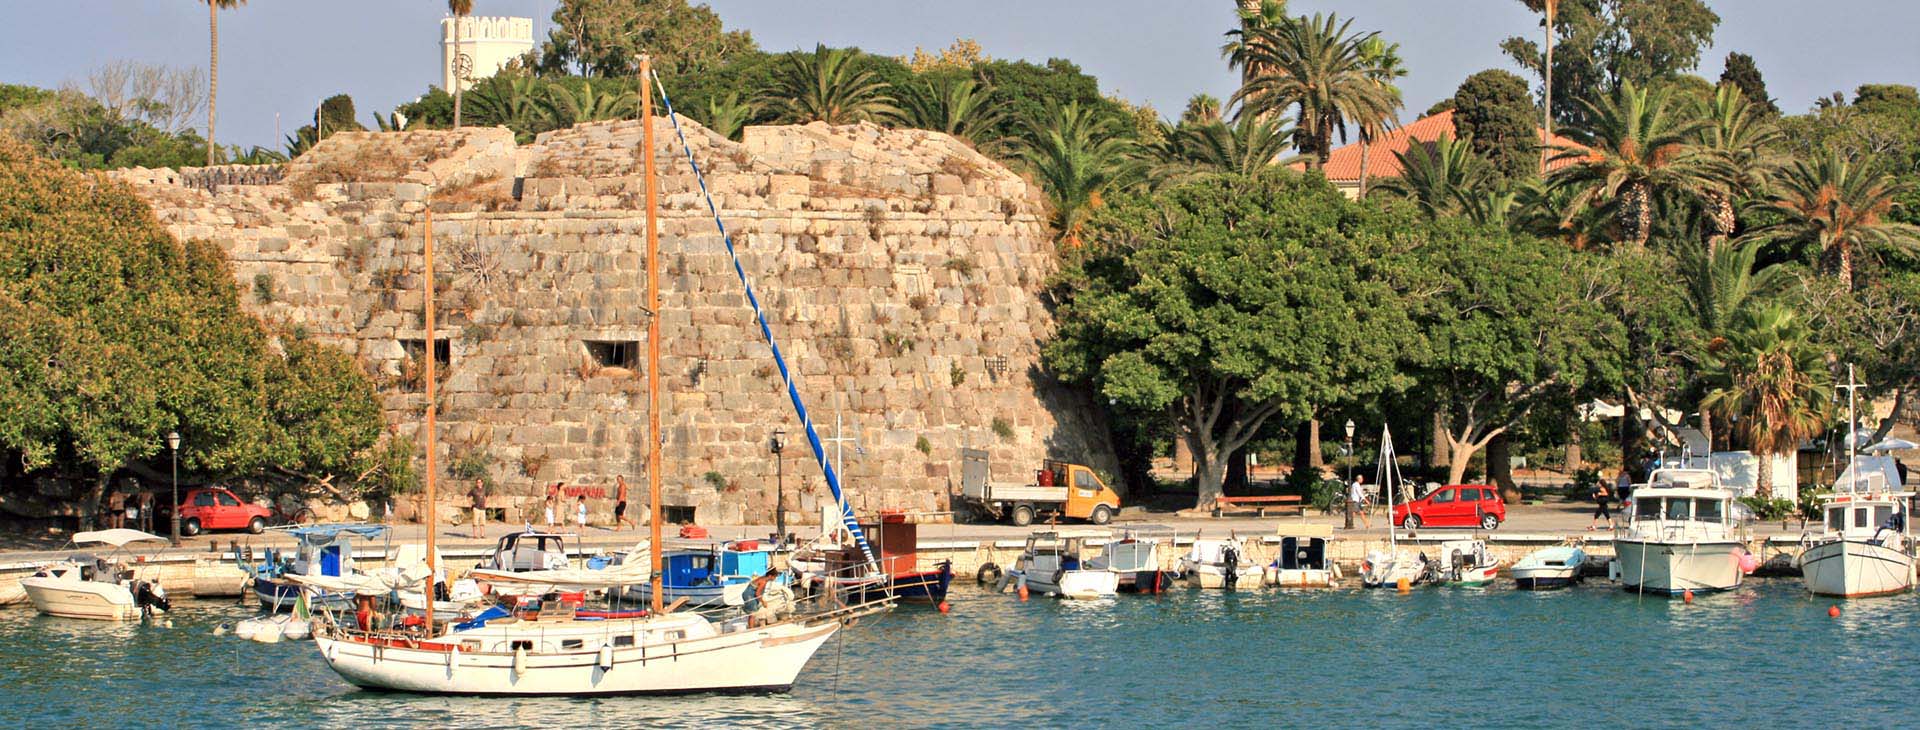 The harbour of Kos island